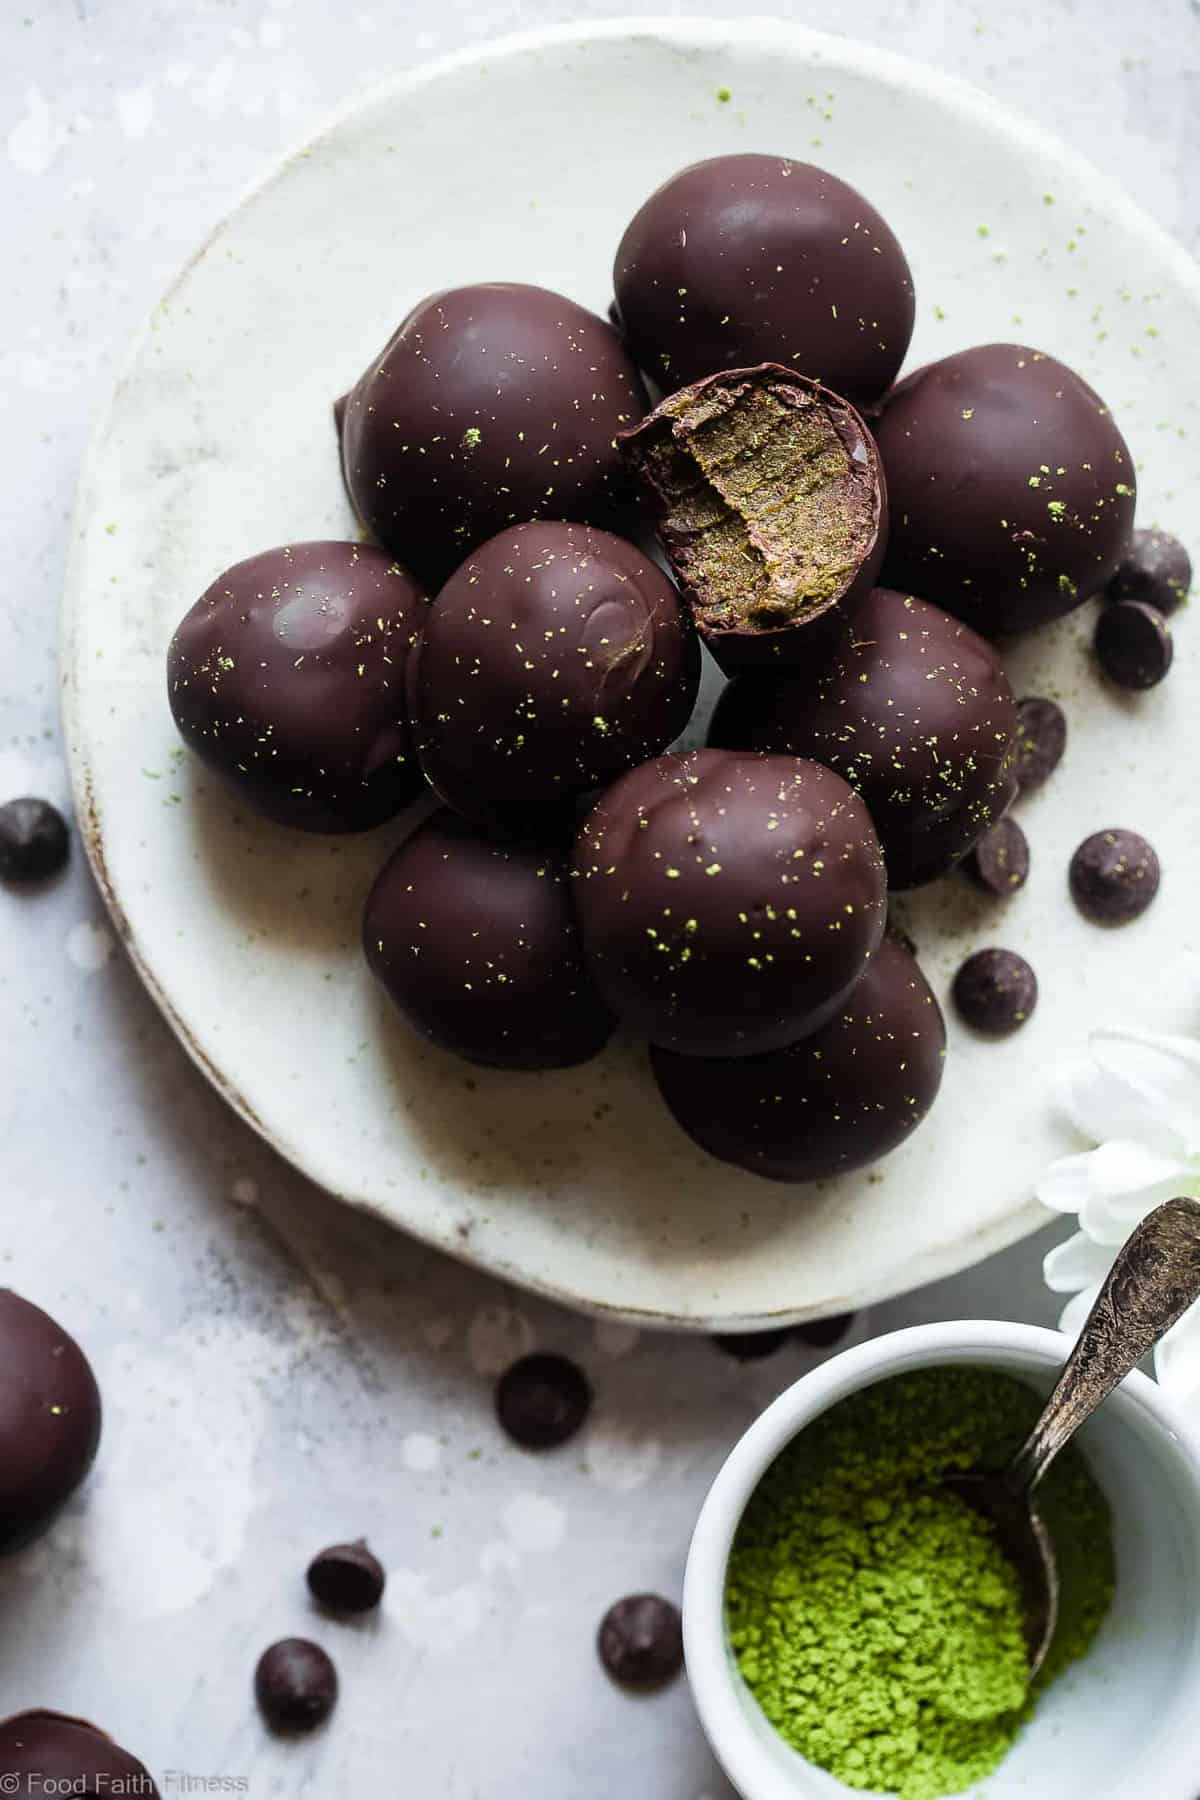 5 Ingredient No Bake Matcha Energy Protein Balls - Quick, easy and gluten/grain/dairy free and paleo and vegan friendly ! A healthy, protein packed snack that is great for kids and adults! | #Foodfaithfitness | #Vegan #Paleo #Glutenfree #Healthy #Energyballs